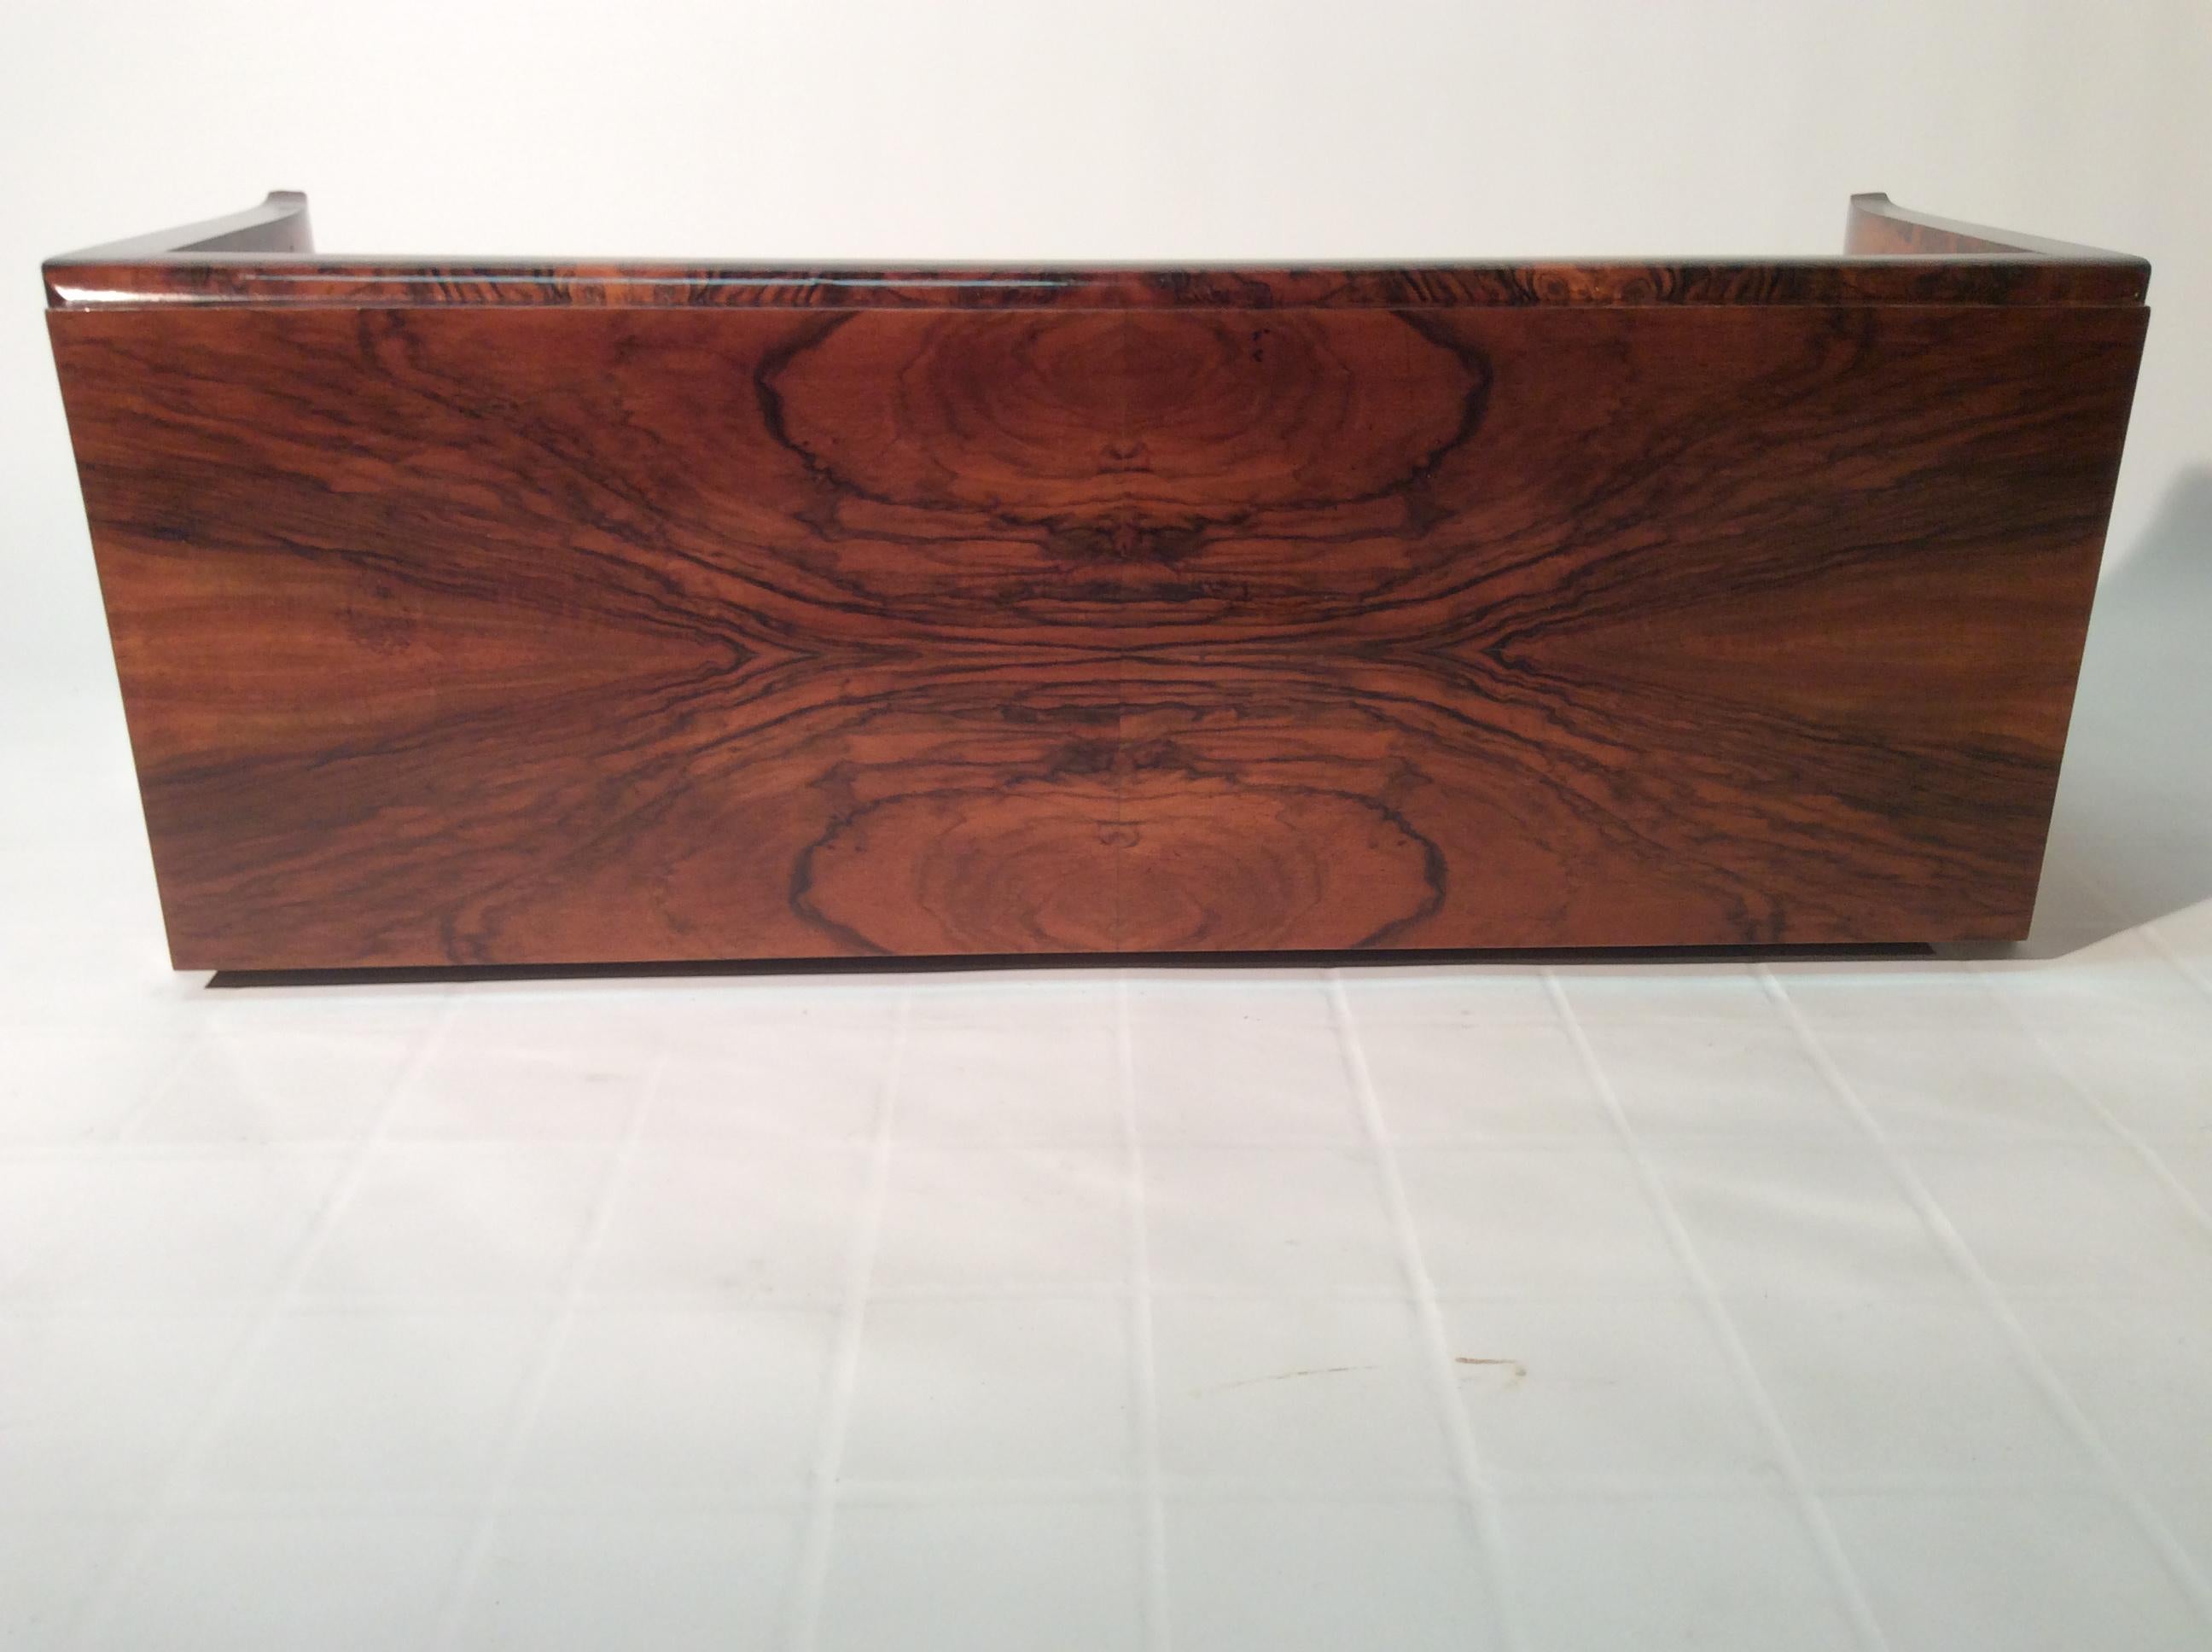 Art Deco Rectangular Coffee Table or Bench with Precious and Elegant Material 2